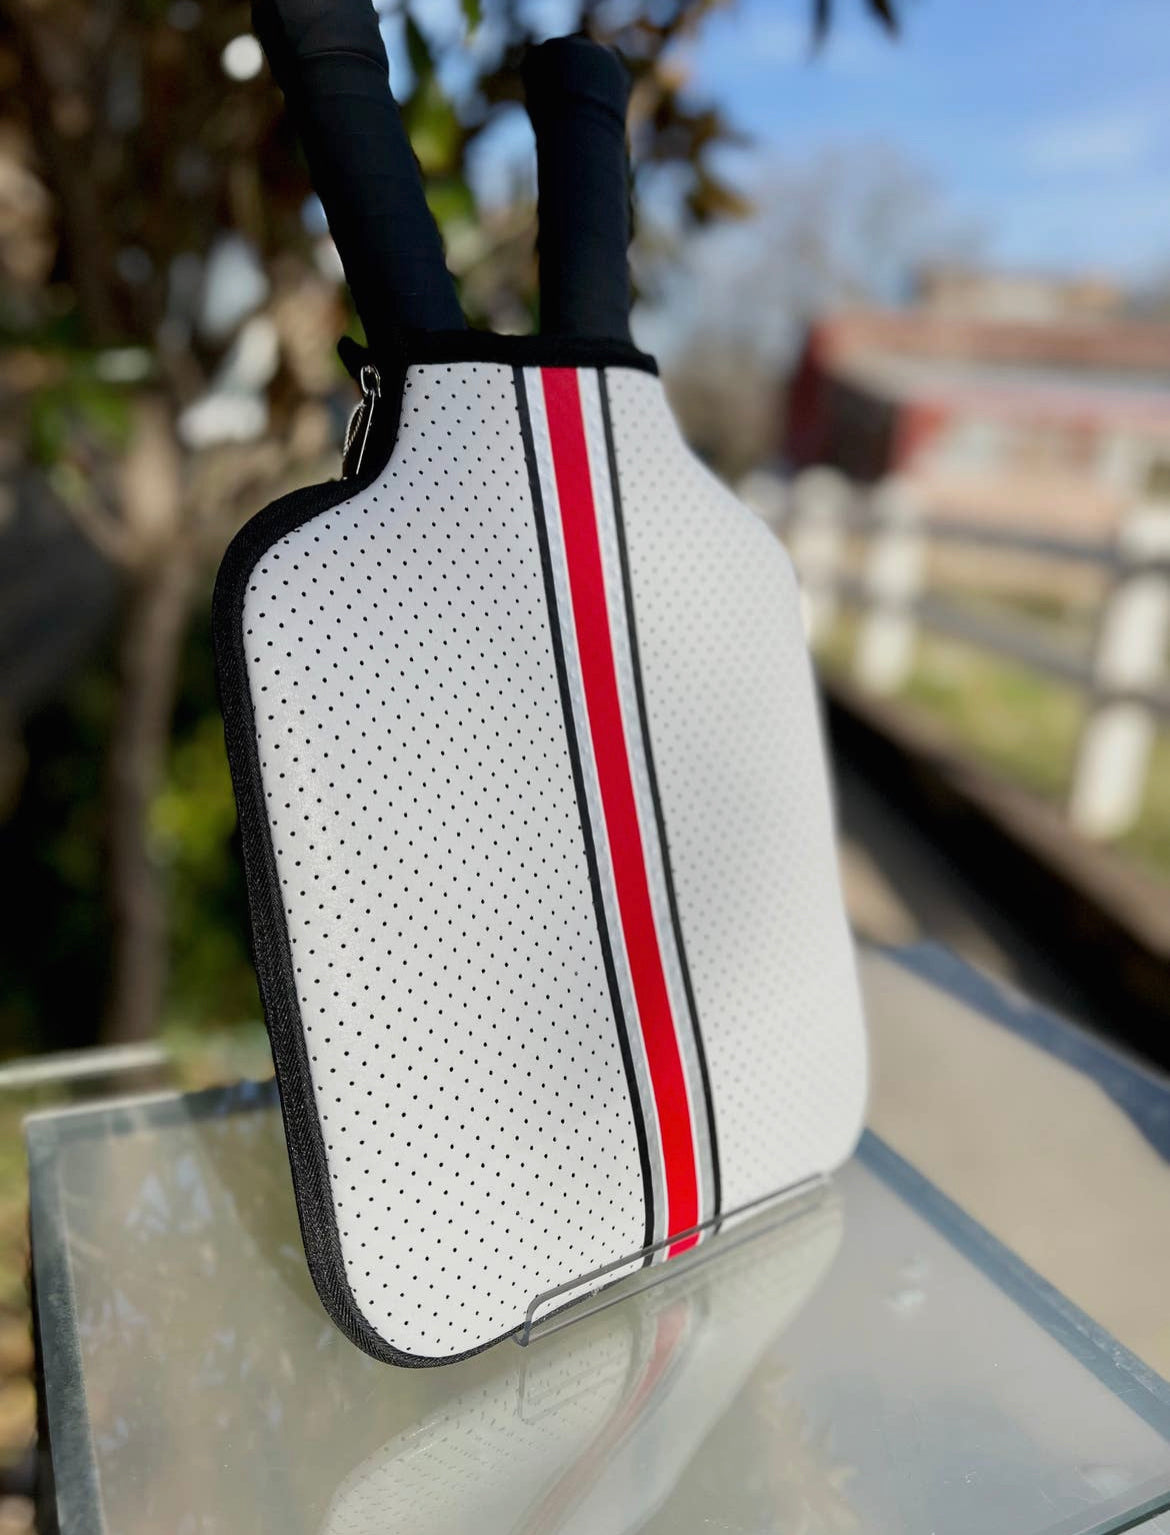 Pickelball Paddle Cover